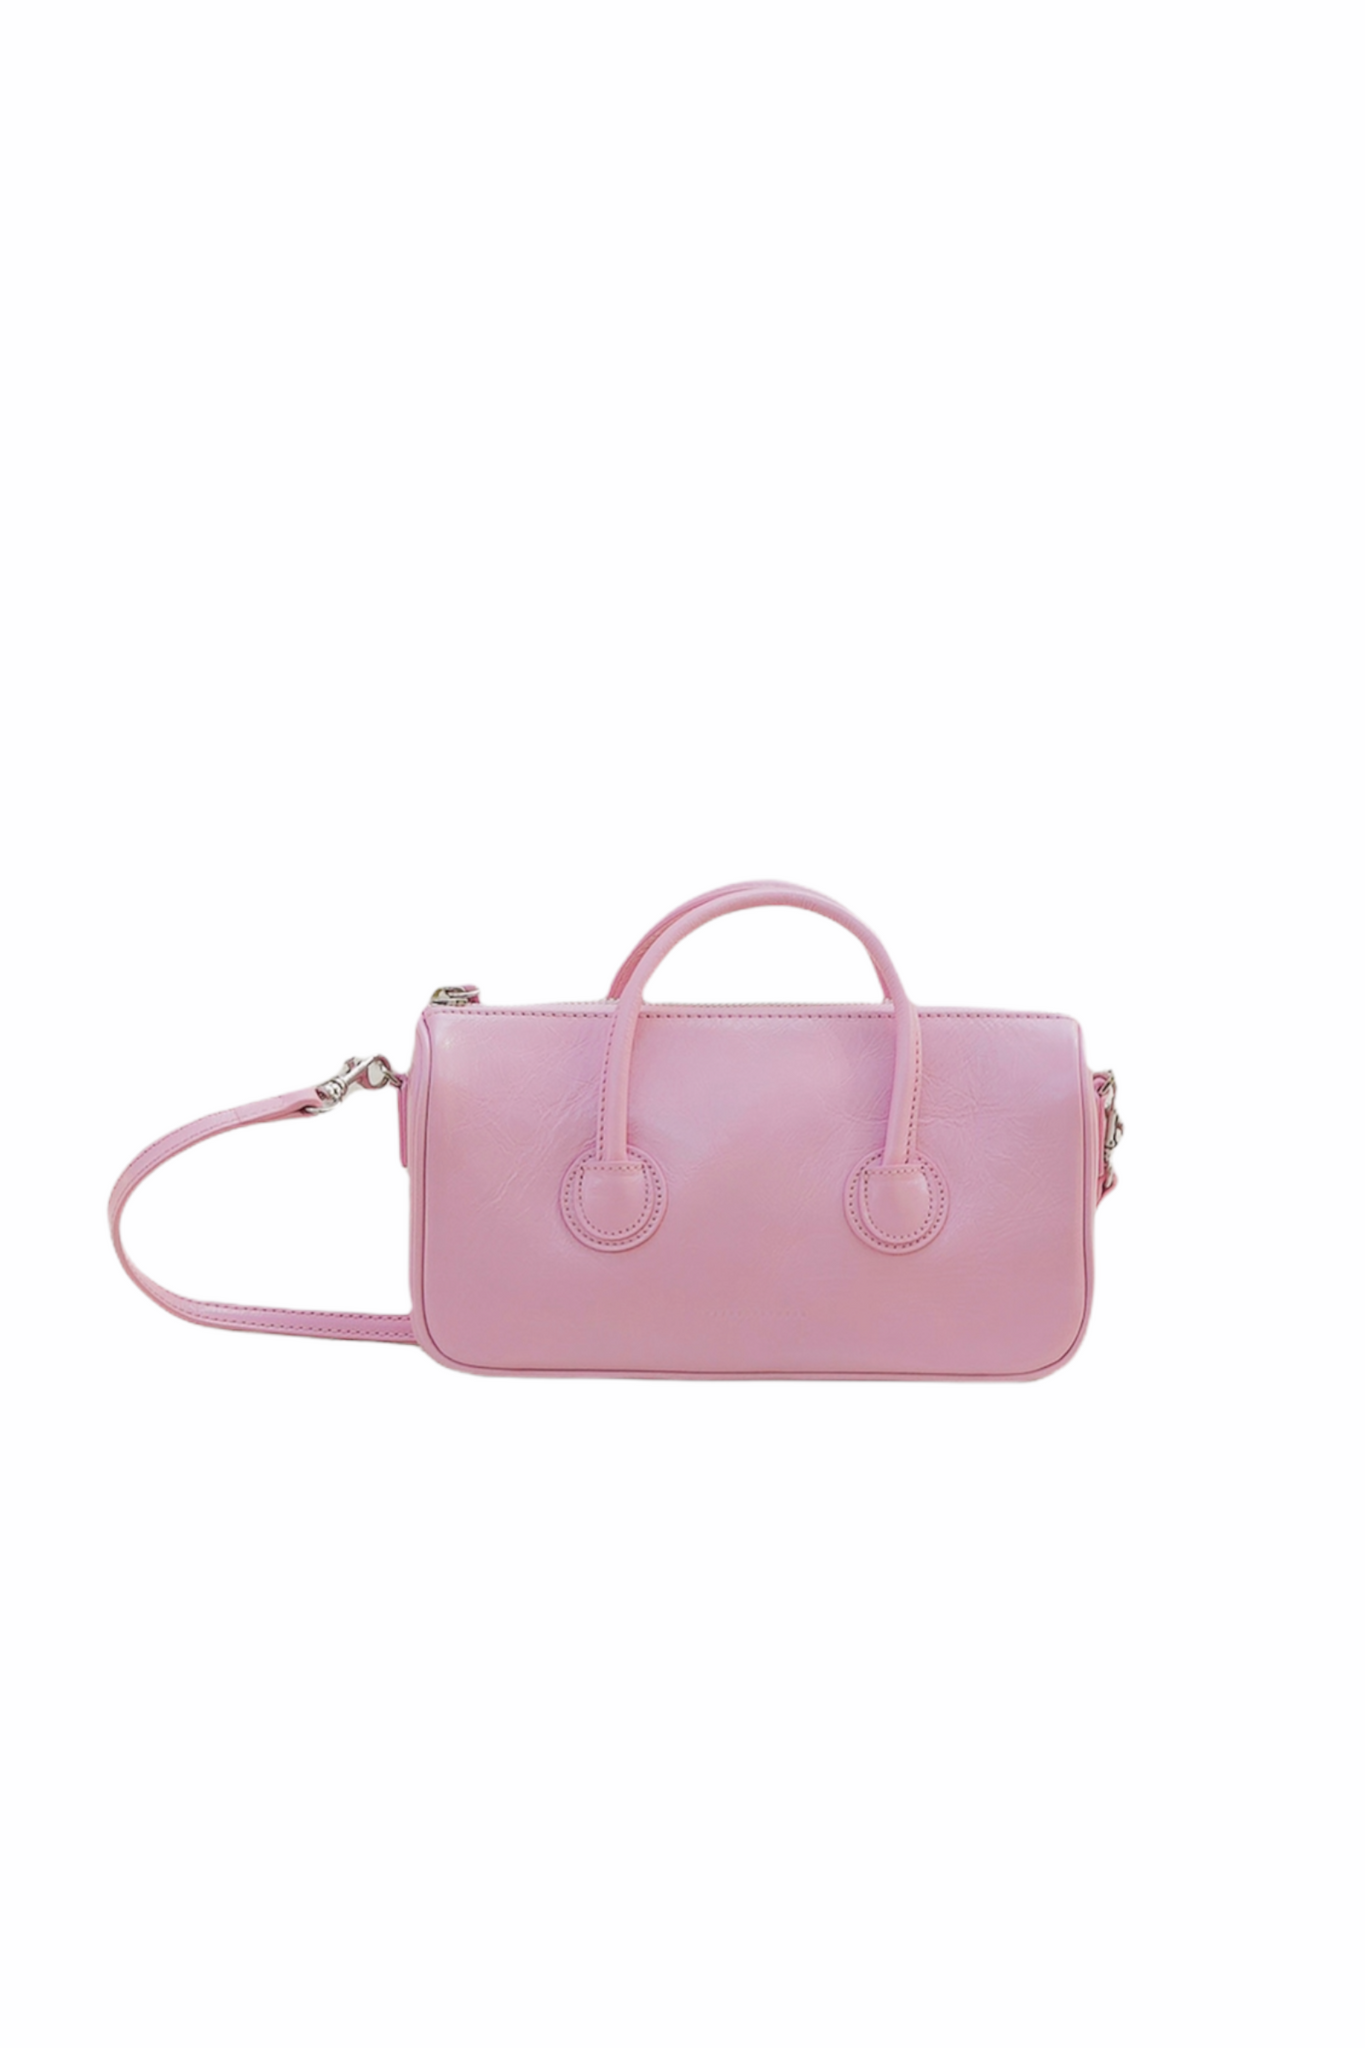 SMALL ZIPPER BAG IN PINK BY MARGESHERWOOD – Jowa.shop